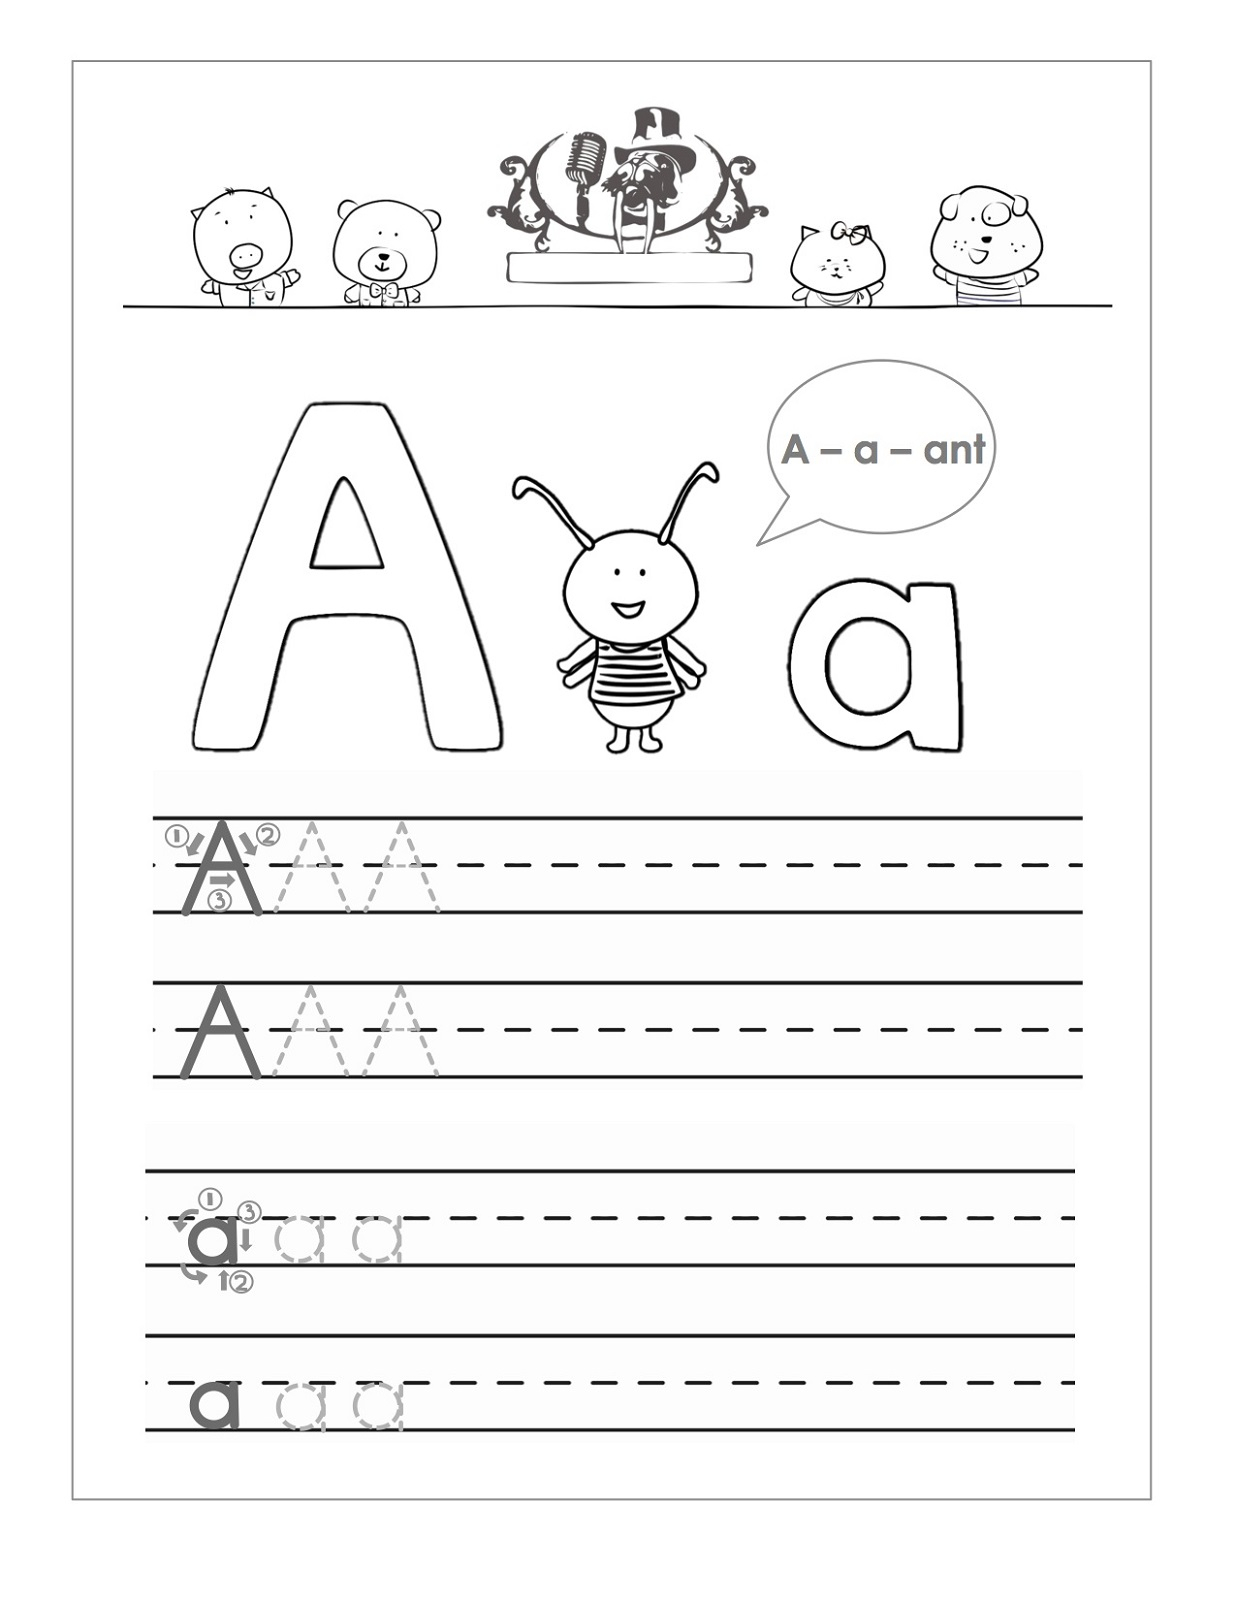 How To Teach Tracing Letters TracingLettersWorksheets